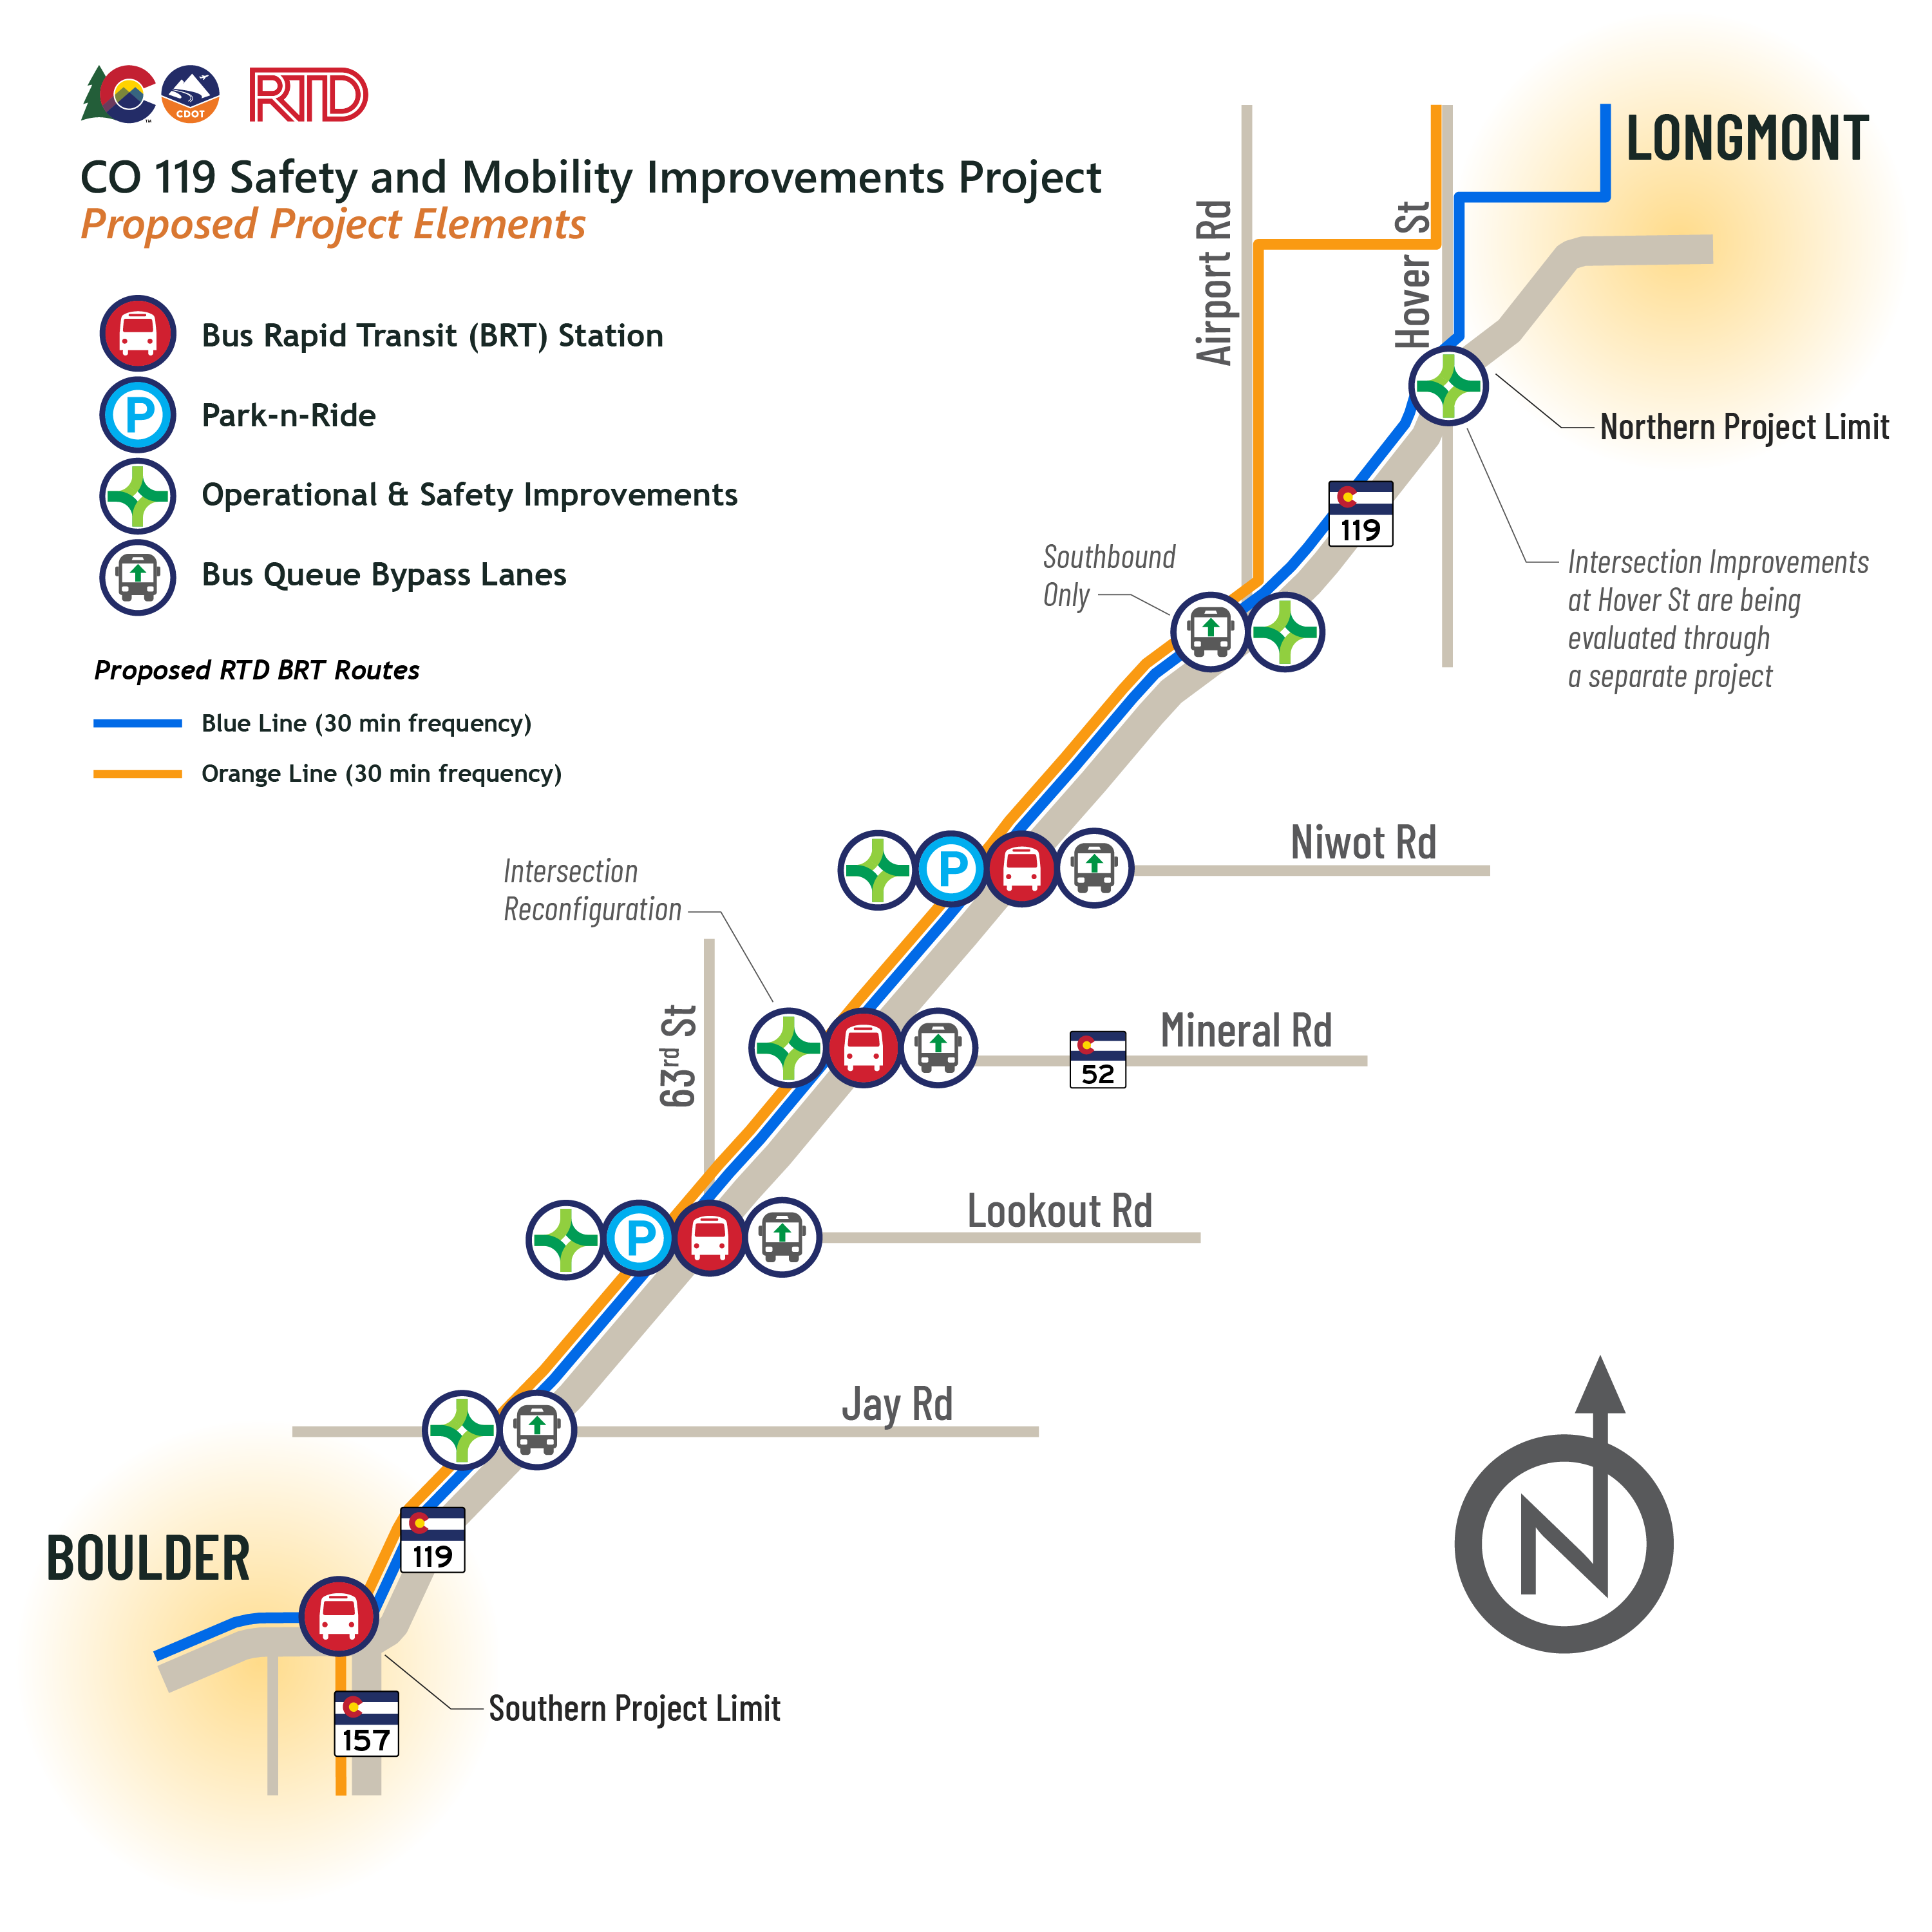 2022_12_21_CO 119 Safety and Mobility Improvements Homepage Map.png detail image